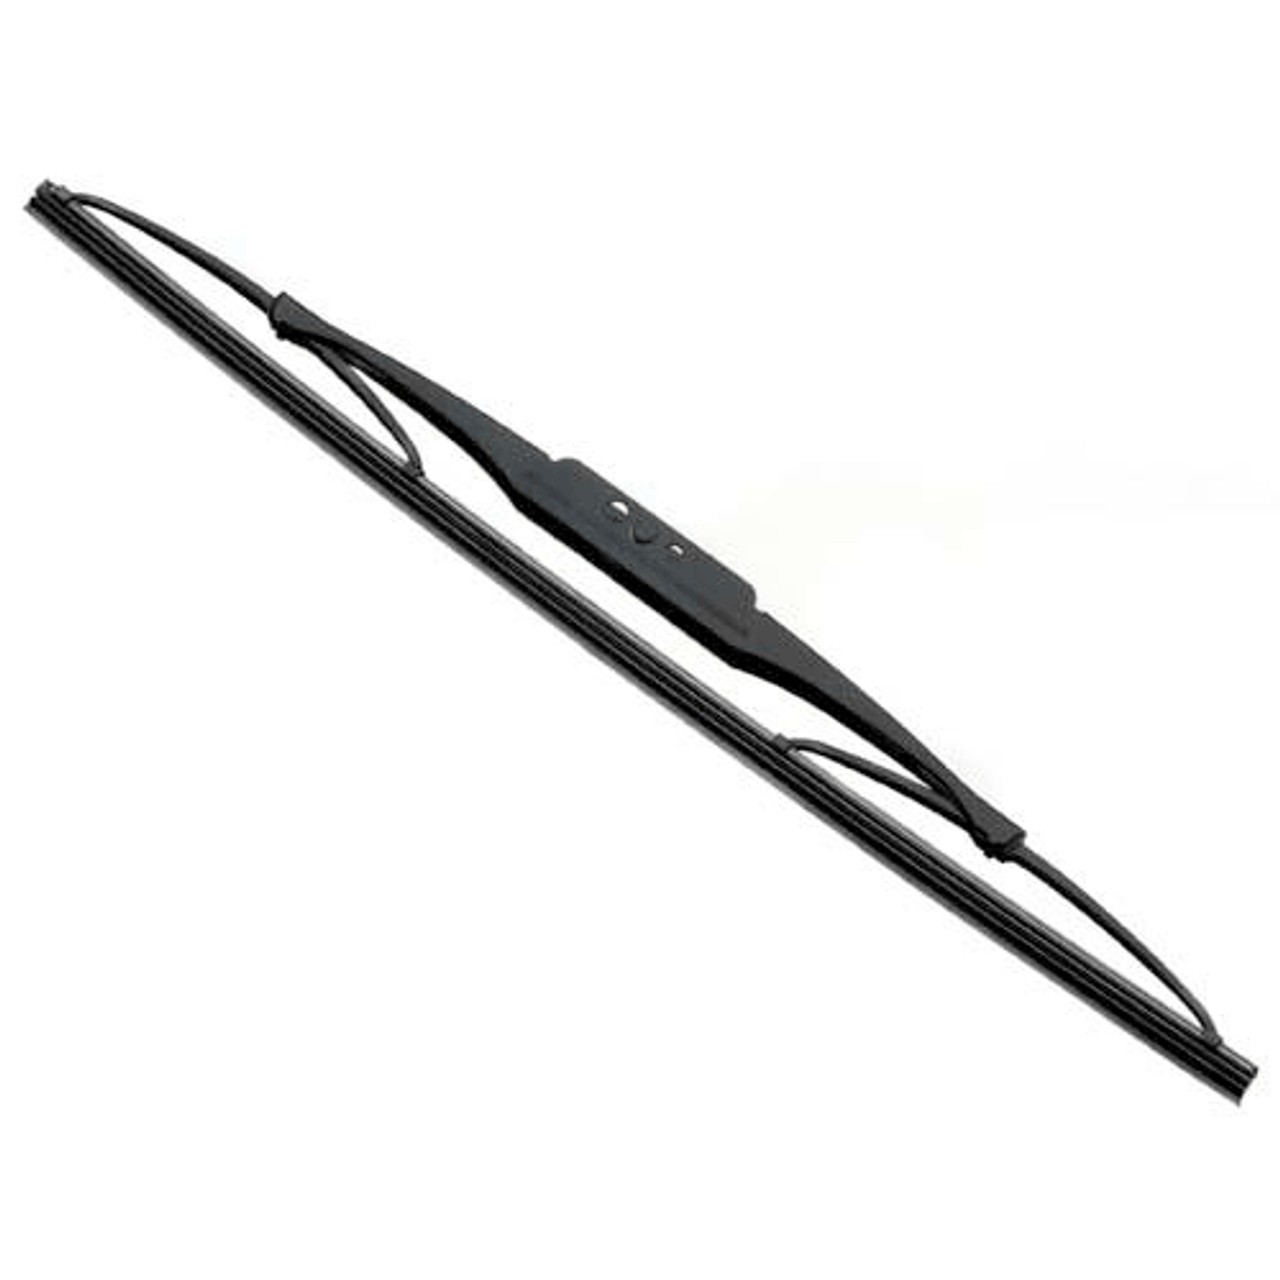 Hand Operated Front Windshield Wiper Car Manual Wipers Universal Wiper Kit